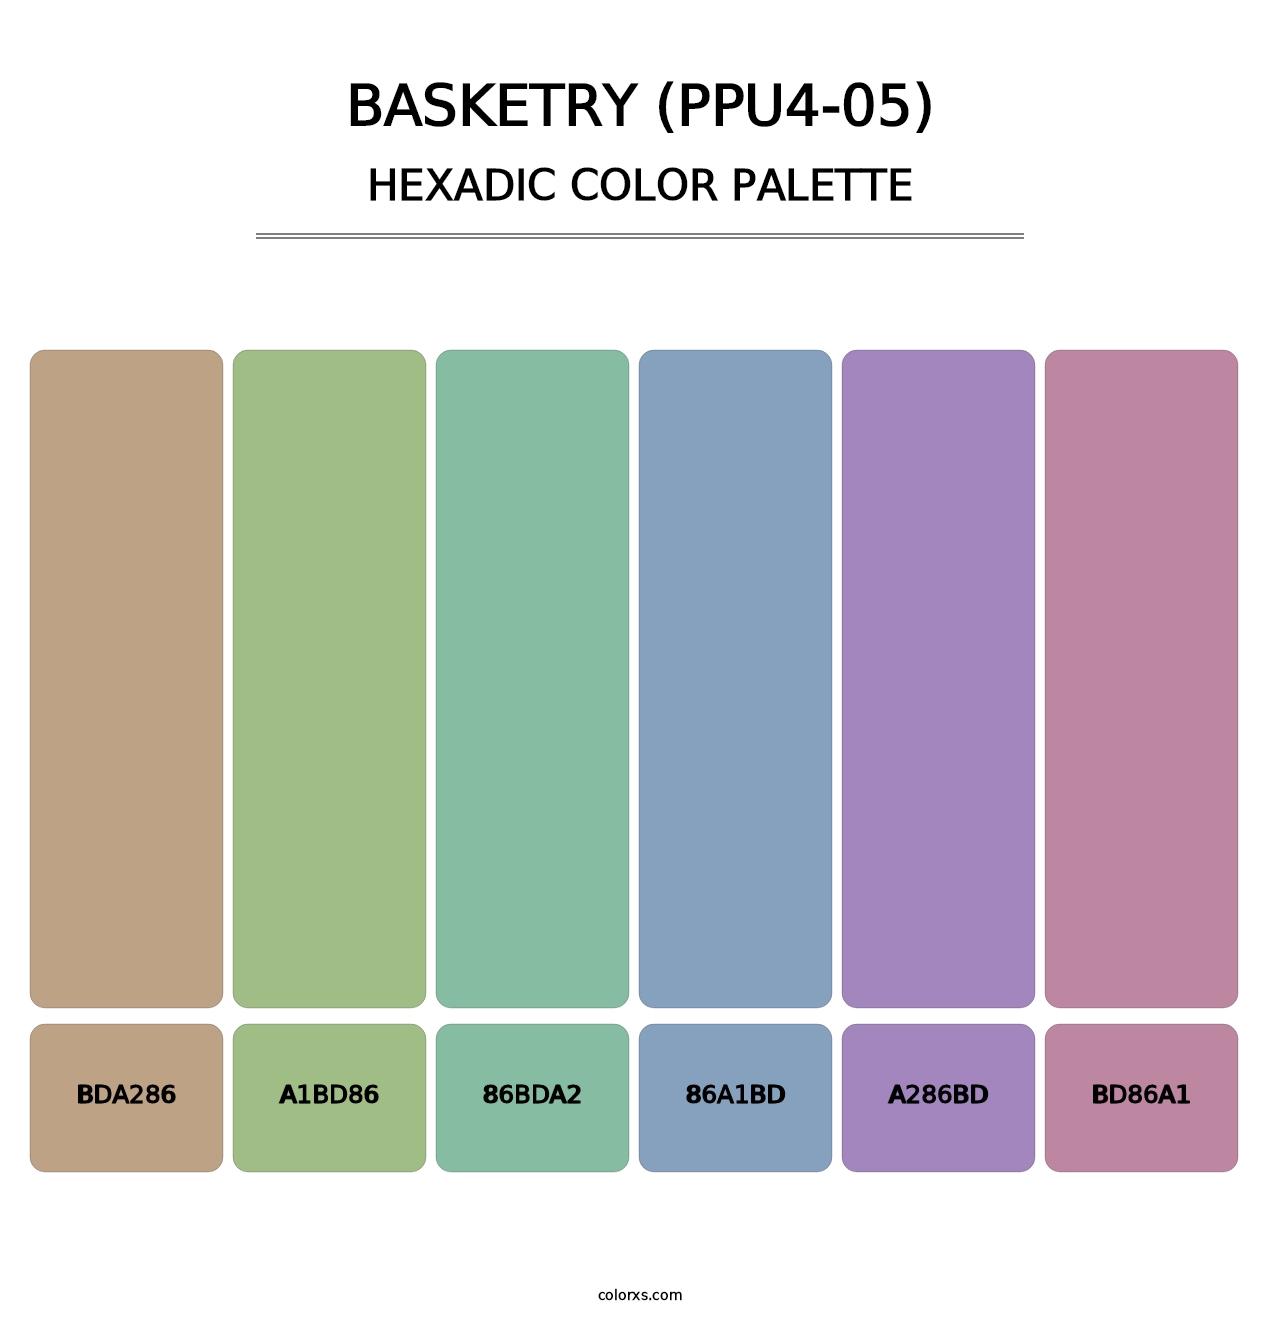 Basketry (PPU4-05) - Hexadic Color Palette